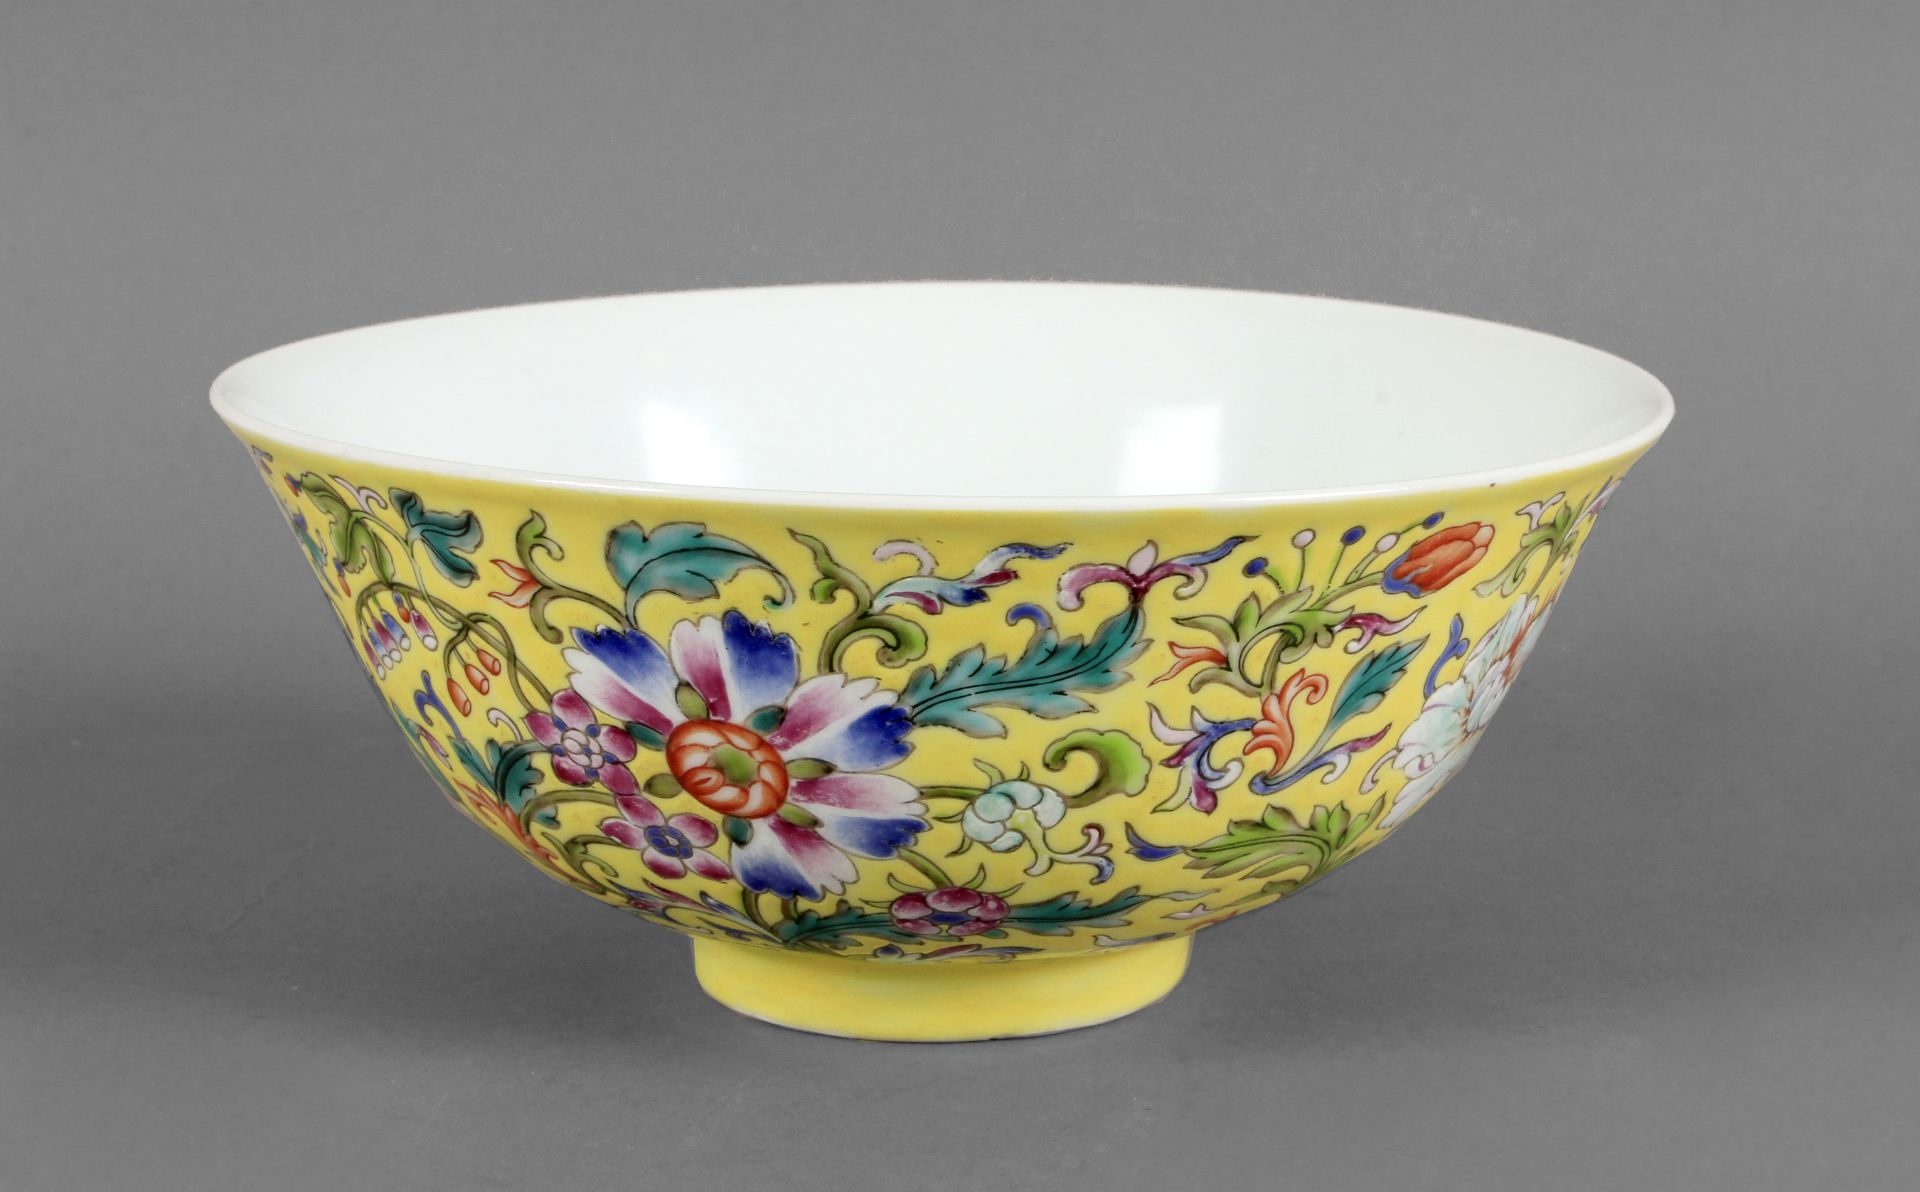 A 20th century Chinese Famille Rose bowl